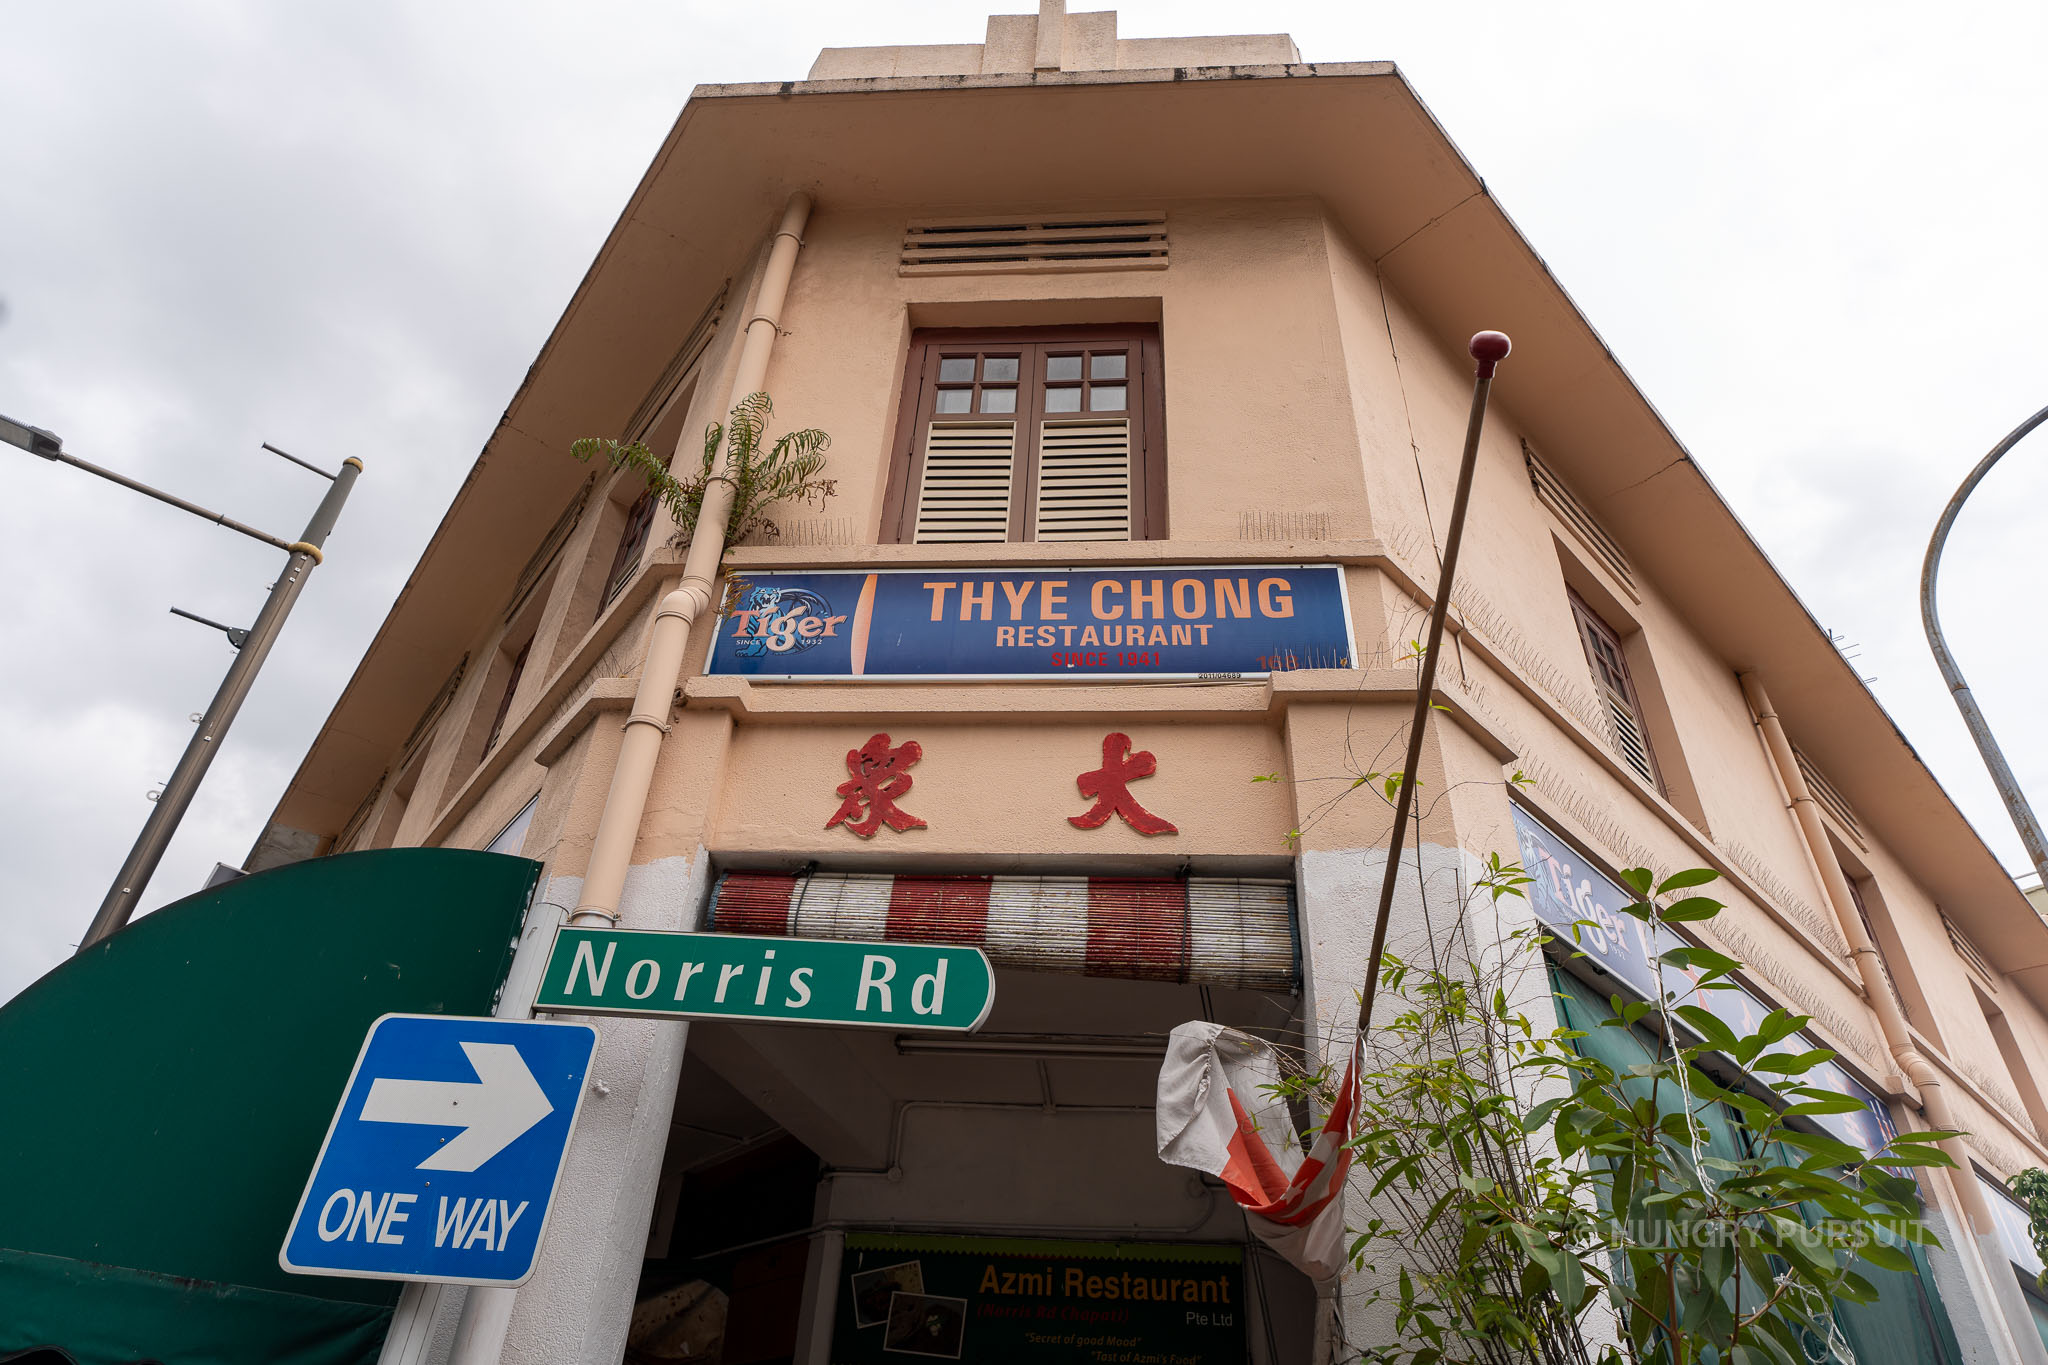 Exterior view of Azmi Restaurant, a popular eatery in Little India, Singapore.